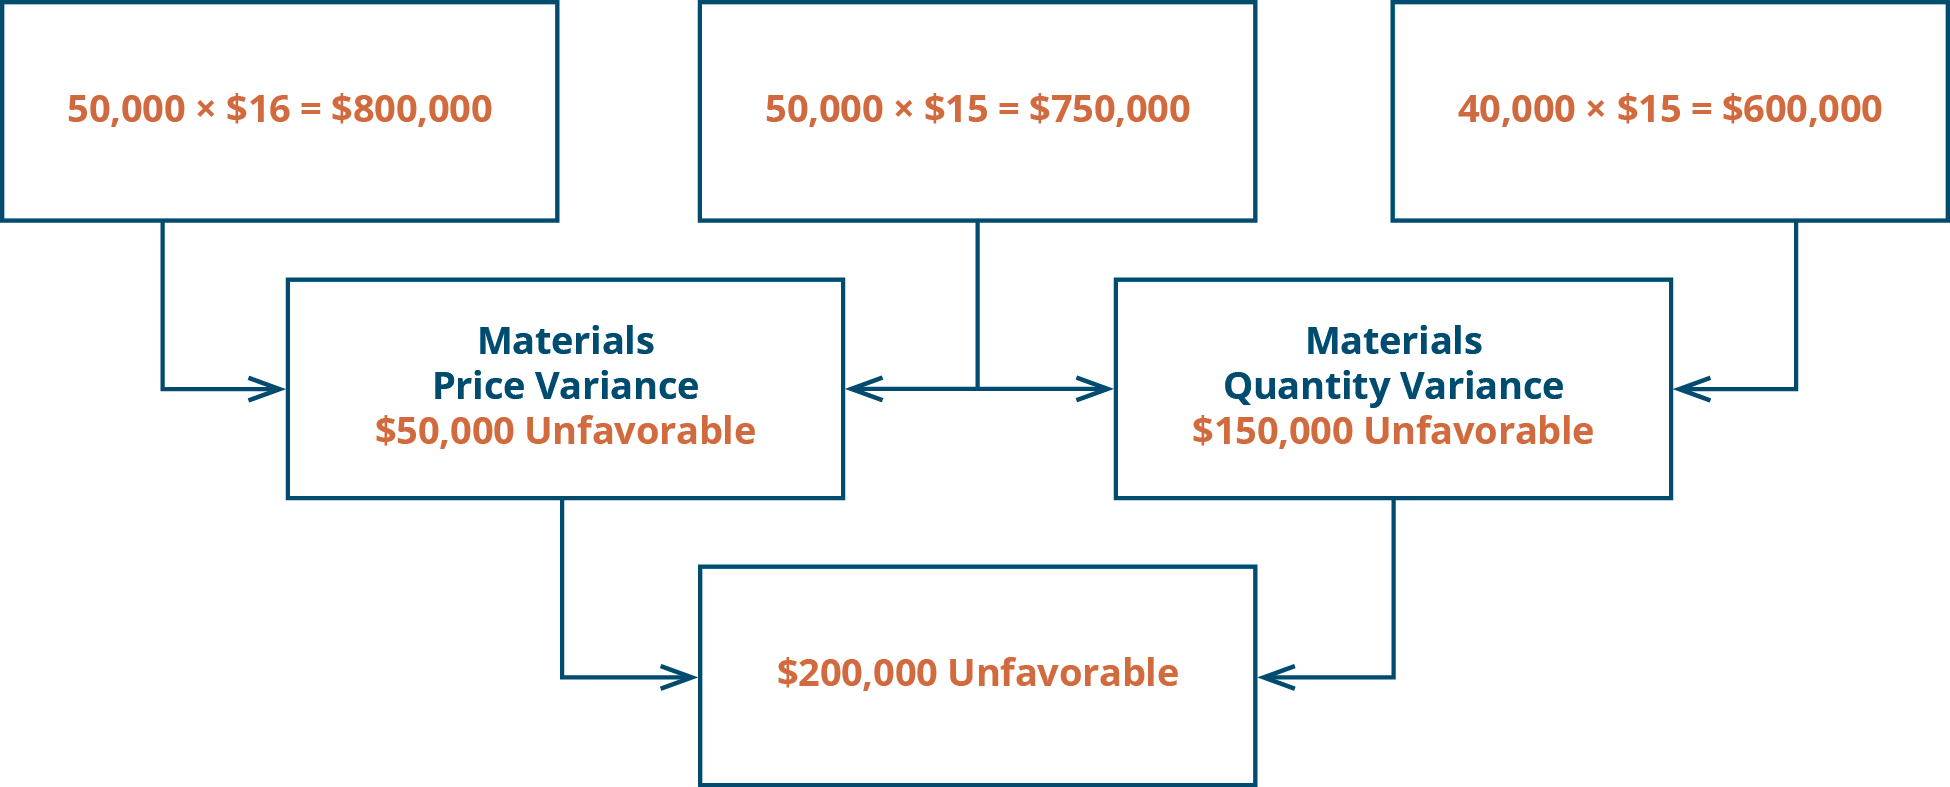 Materials Price Variance 50,000 times $16 equals $800,000. 50,000 times $15 equals $750,000. $50,000 unfavorable, Plus: Materials Quantity variance 50,000 times $15 equals 750,000. 40,000 times $15 equals $600,00. $150,000 unfavorable. Equals $200,000 unfavorable.